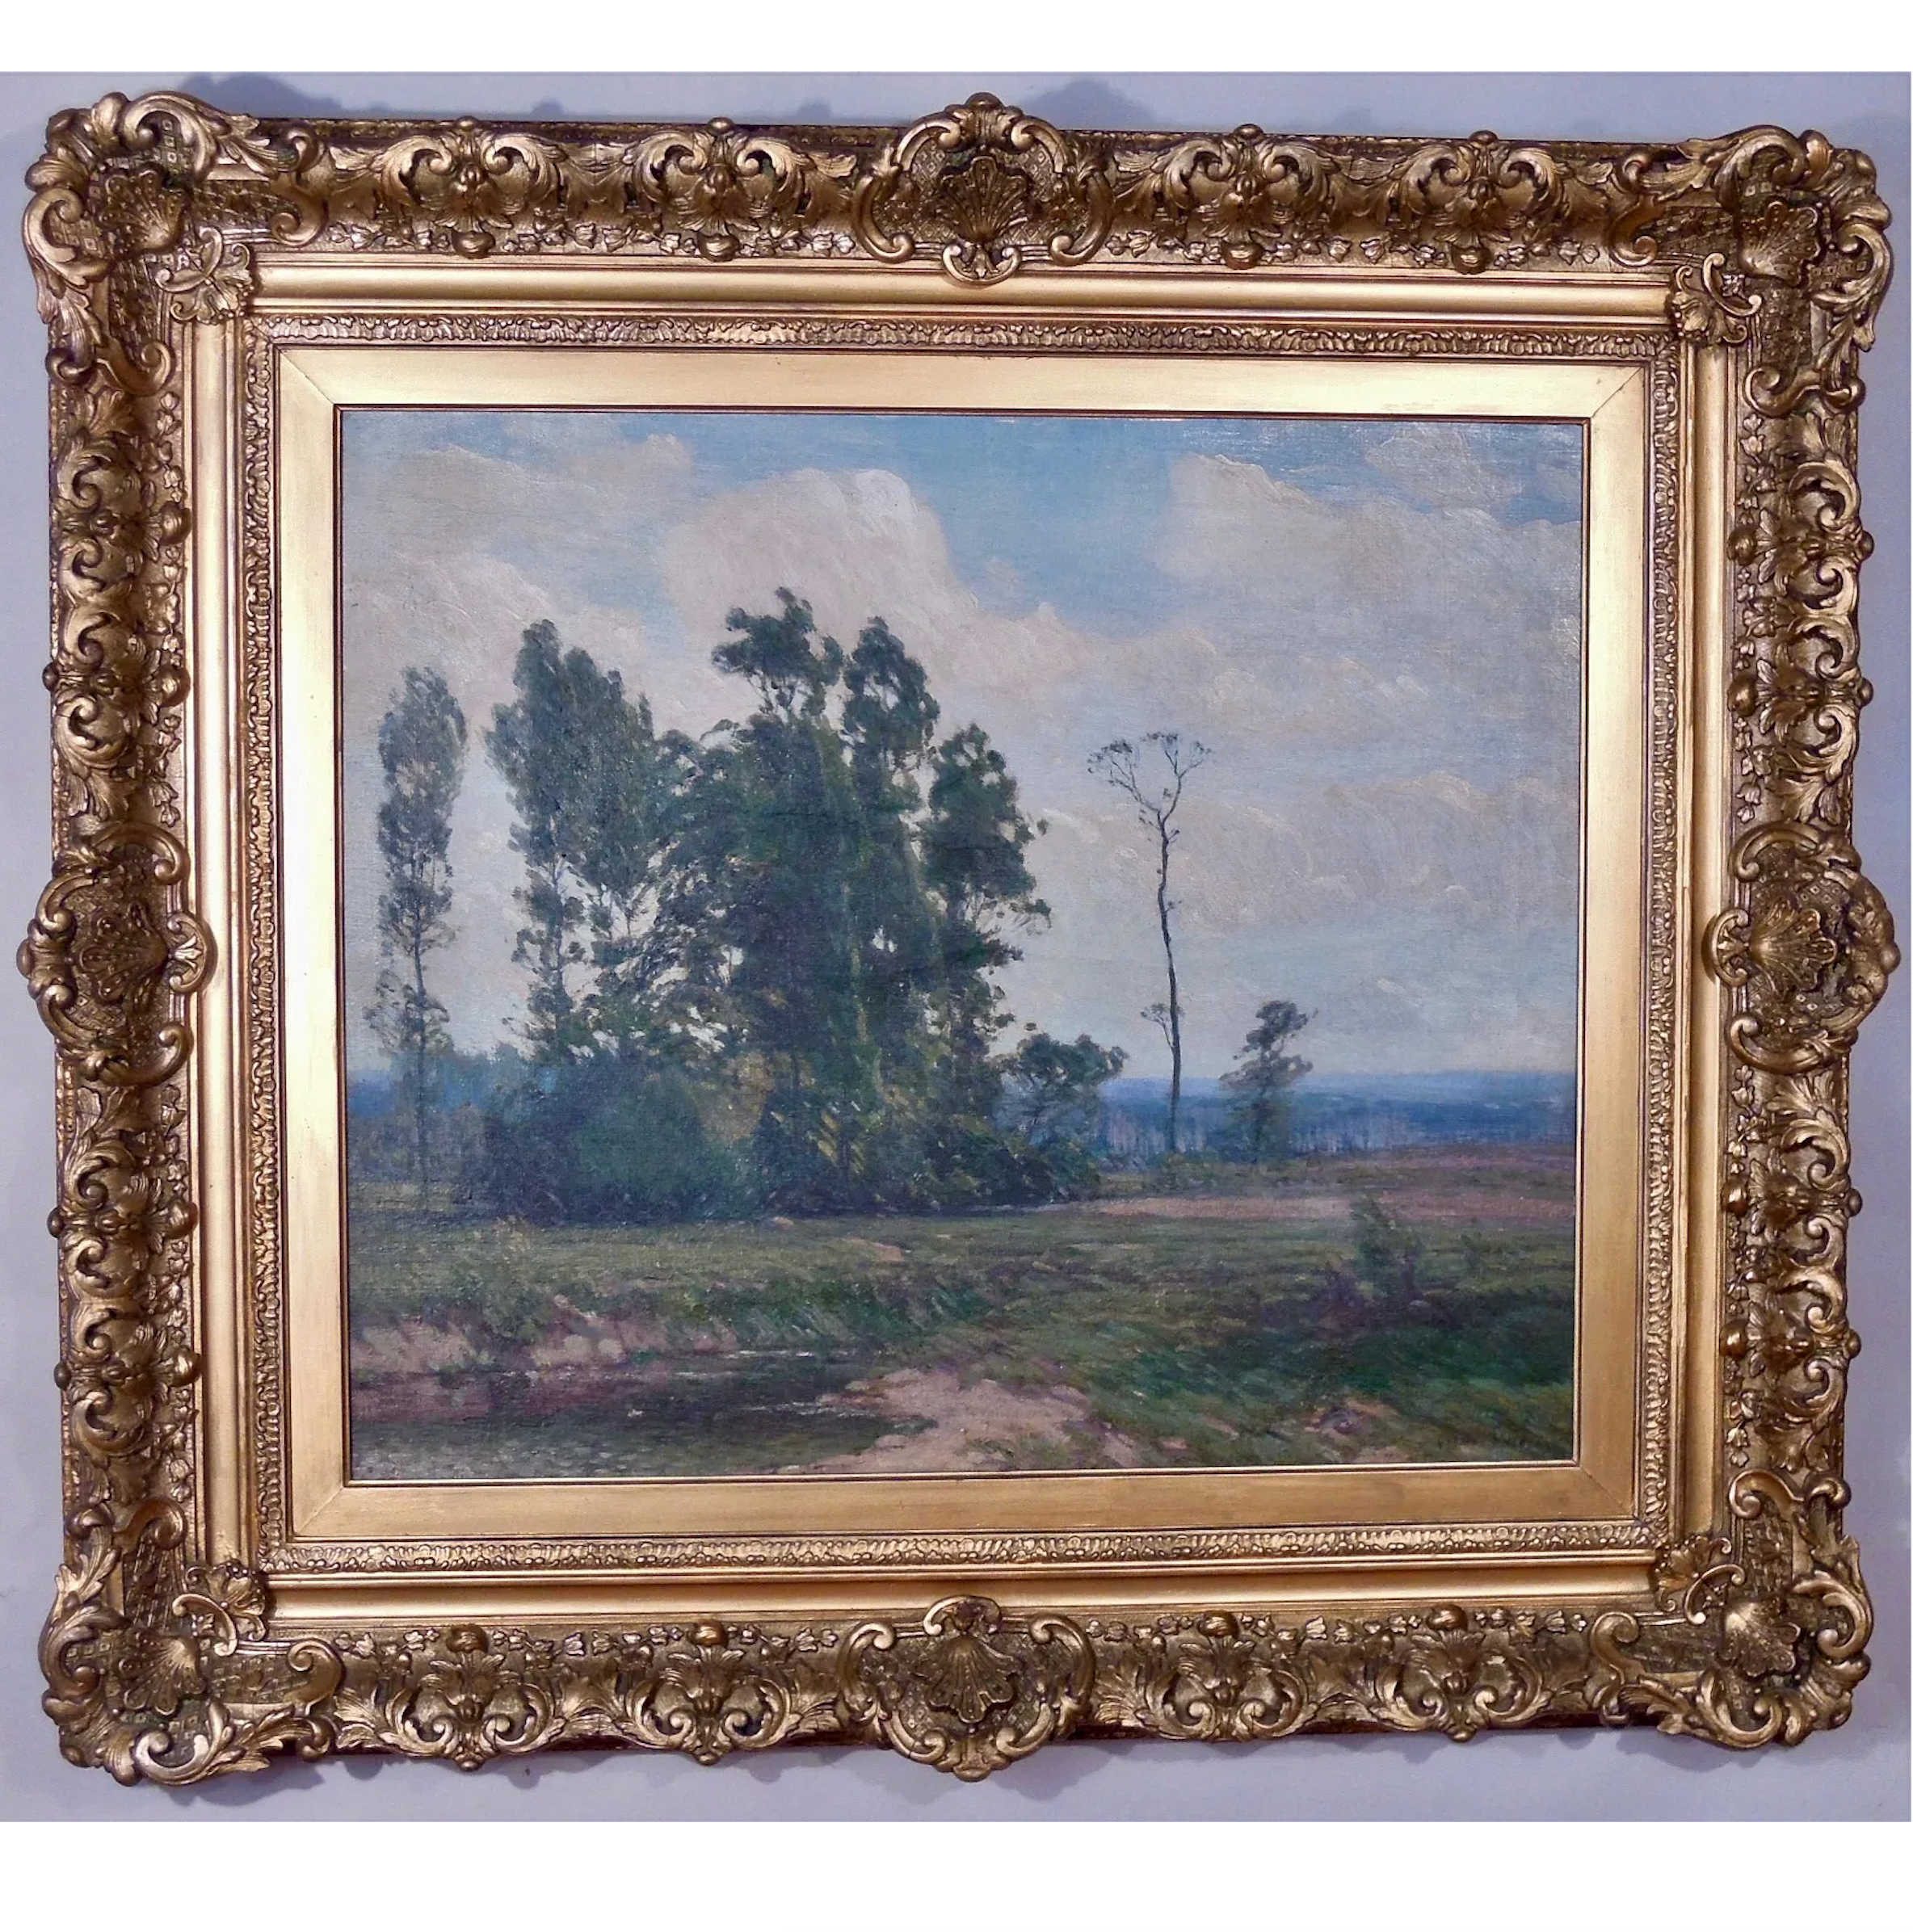 AW612: Gustave Adolph Wiegand, Summer Landscape - Early 20th C Oil on Canvas